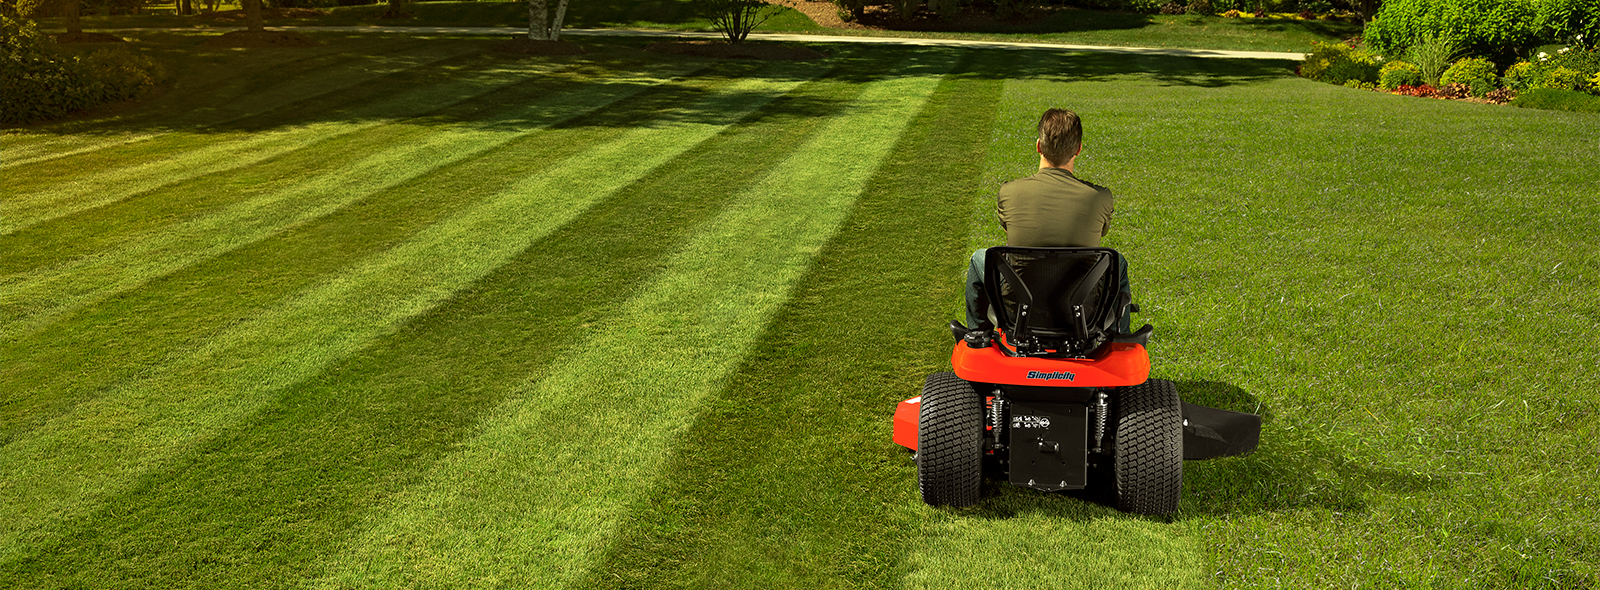 Simplicity Find Your Mower